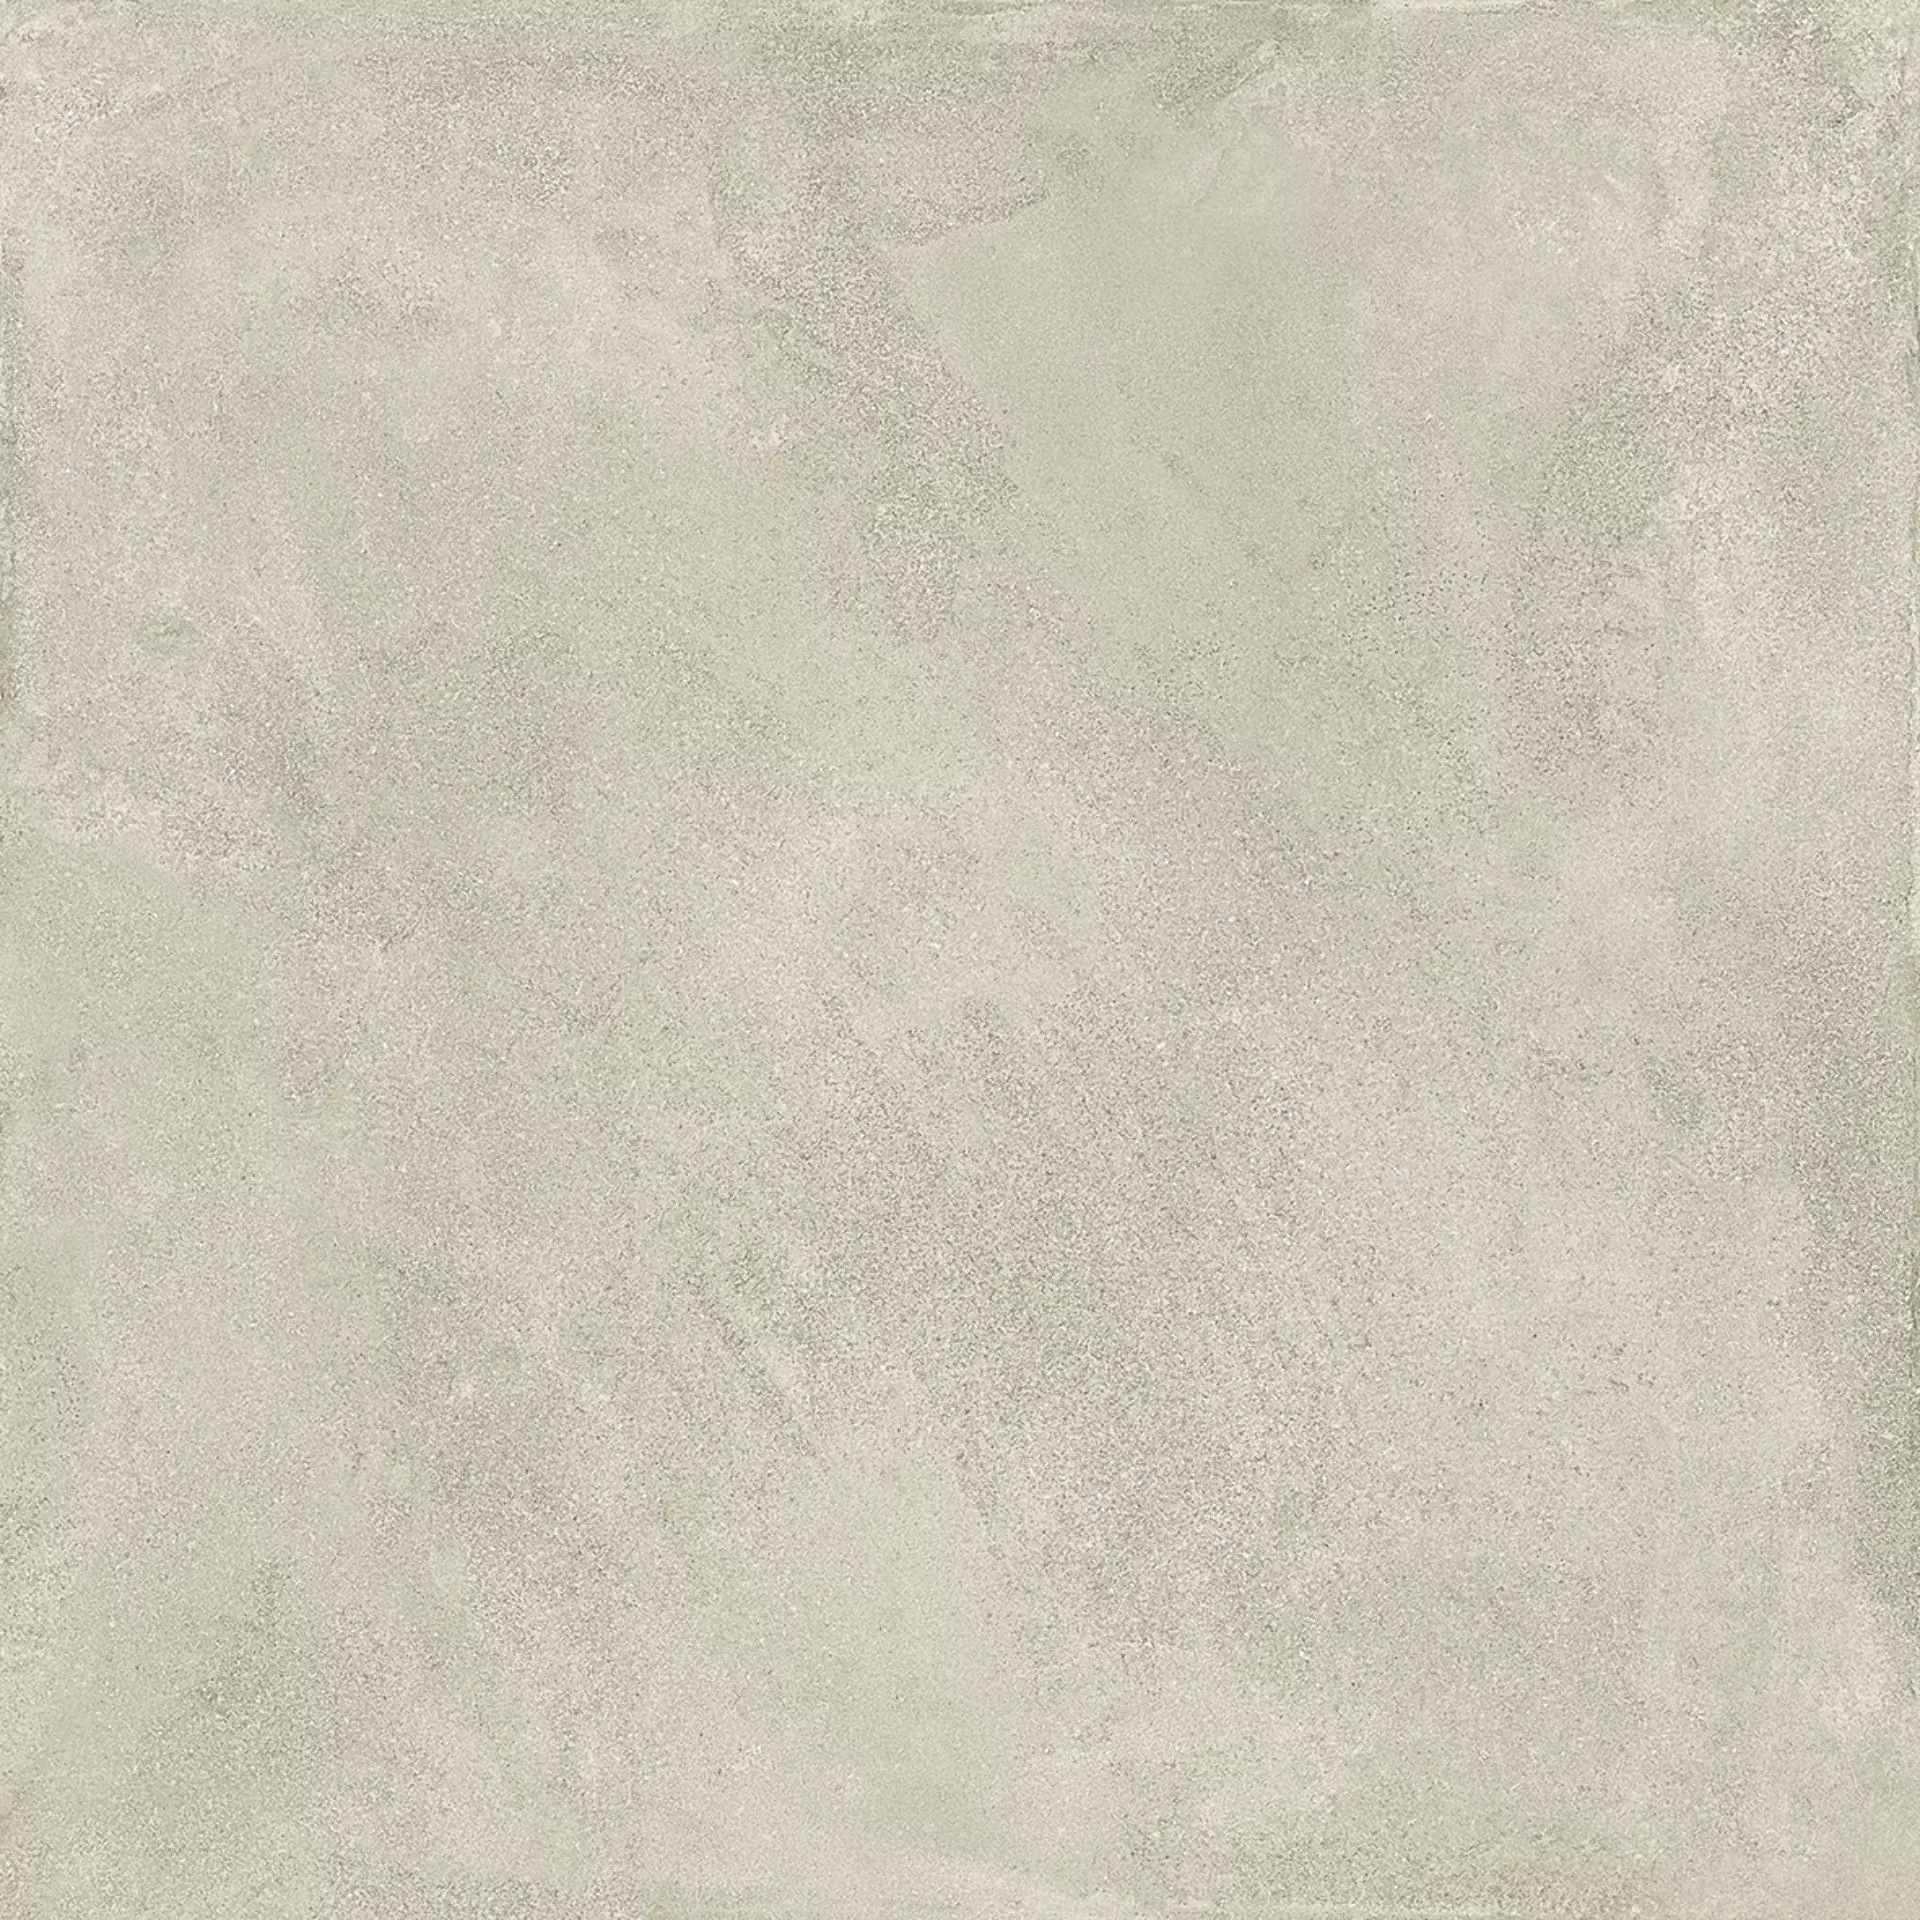 Emilceramica Be-Square Sand Naturale ECXH 80x80cm rectified 9,5mm